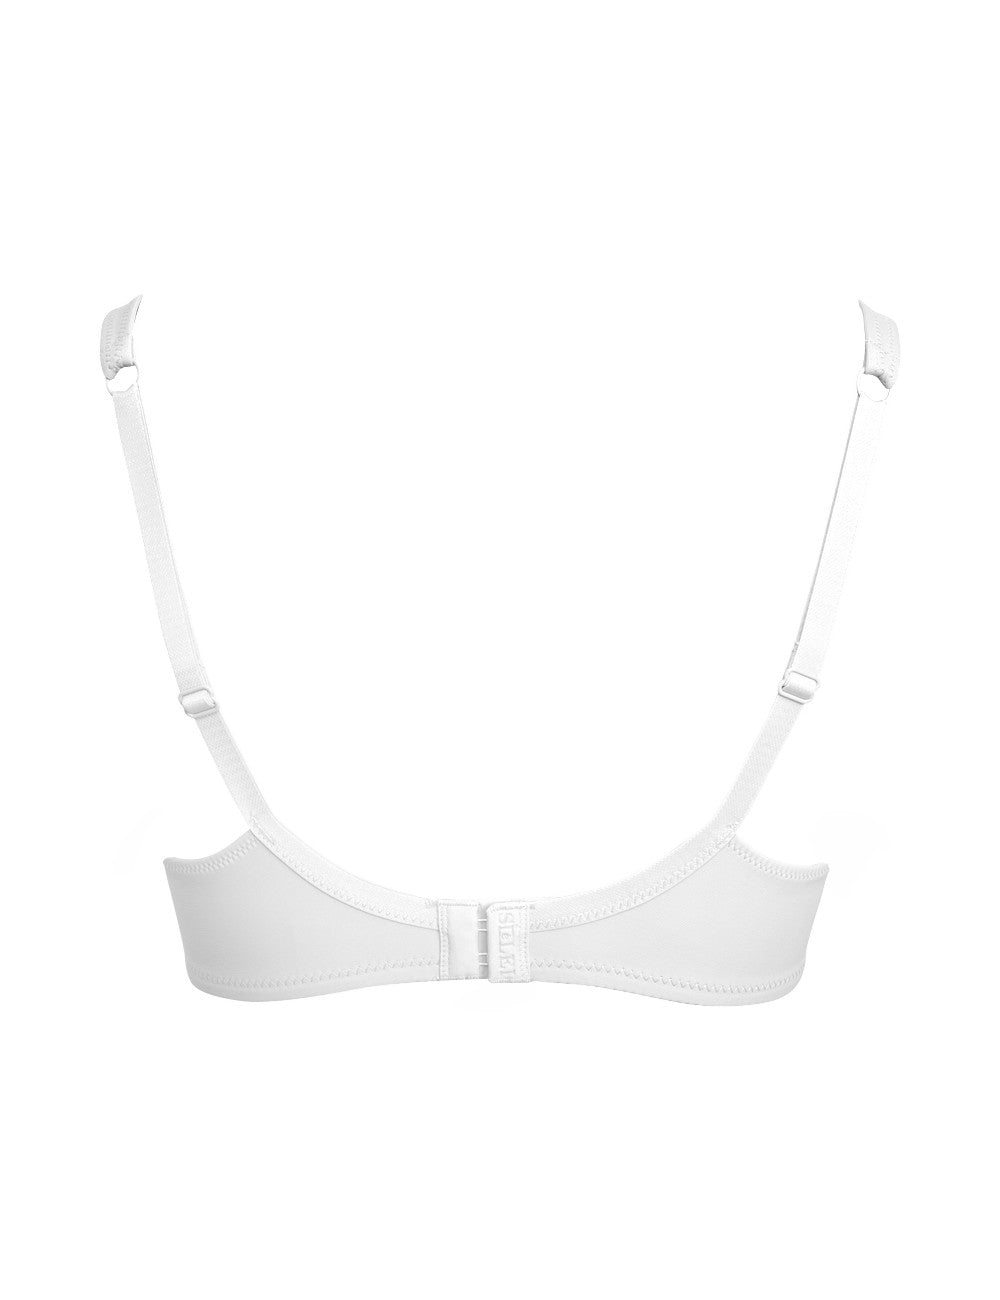 The Beauty line from SIéLEI of Italy presents an unlined soft-cup bra characterized by its graceful design and smooth opaque, stretch microfiber fabric that provide comfort during any activity.